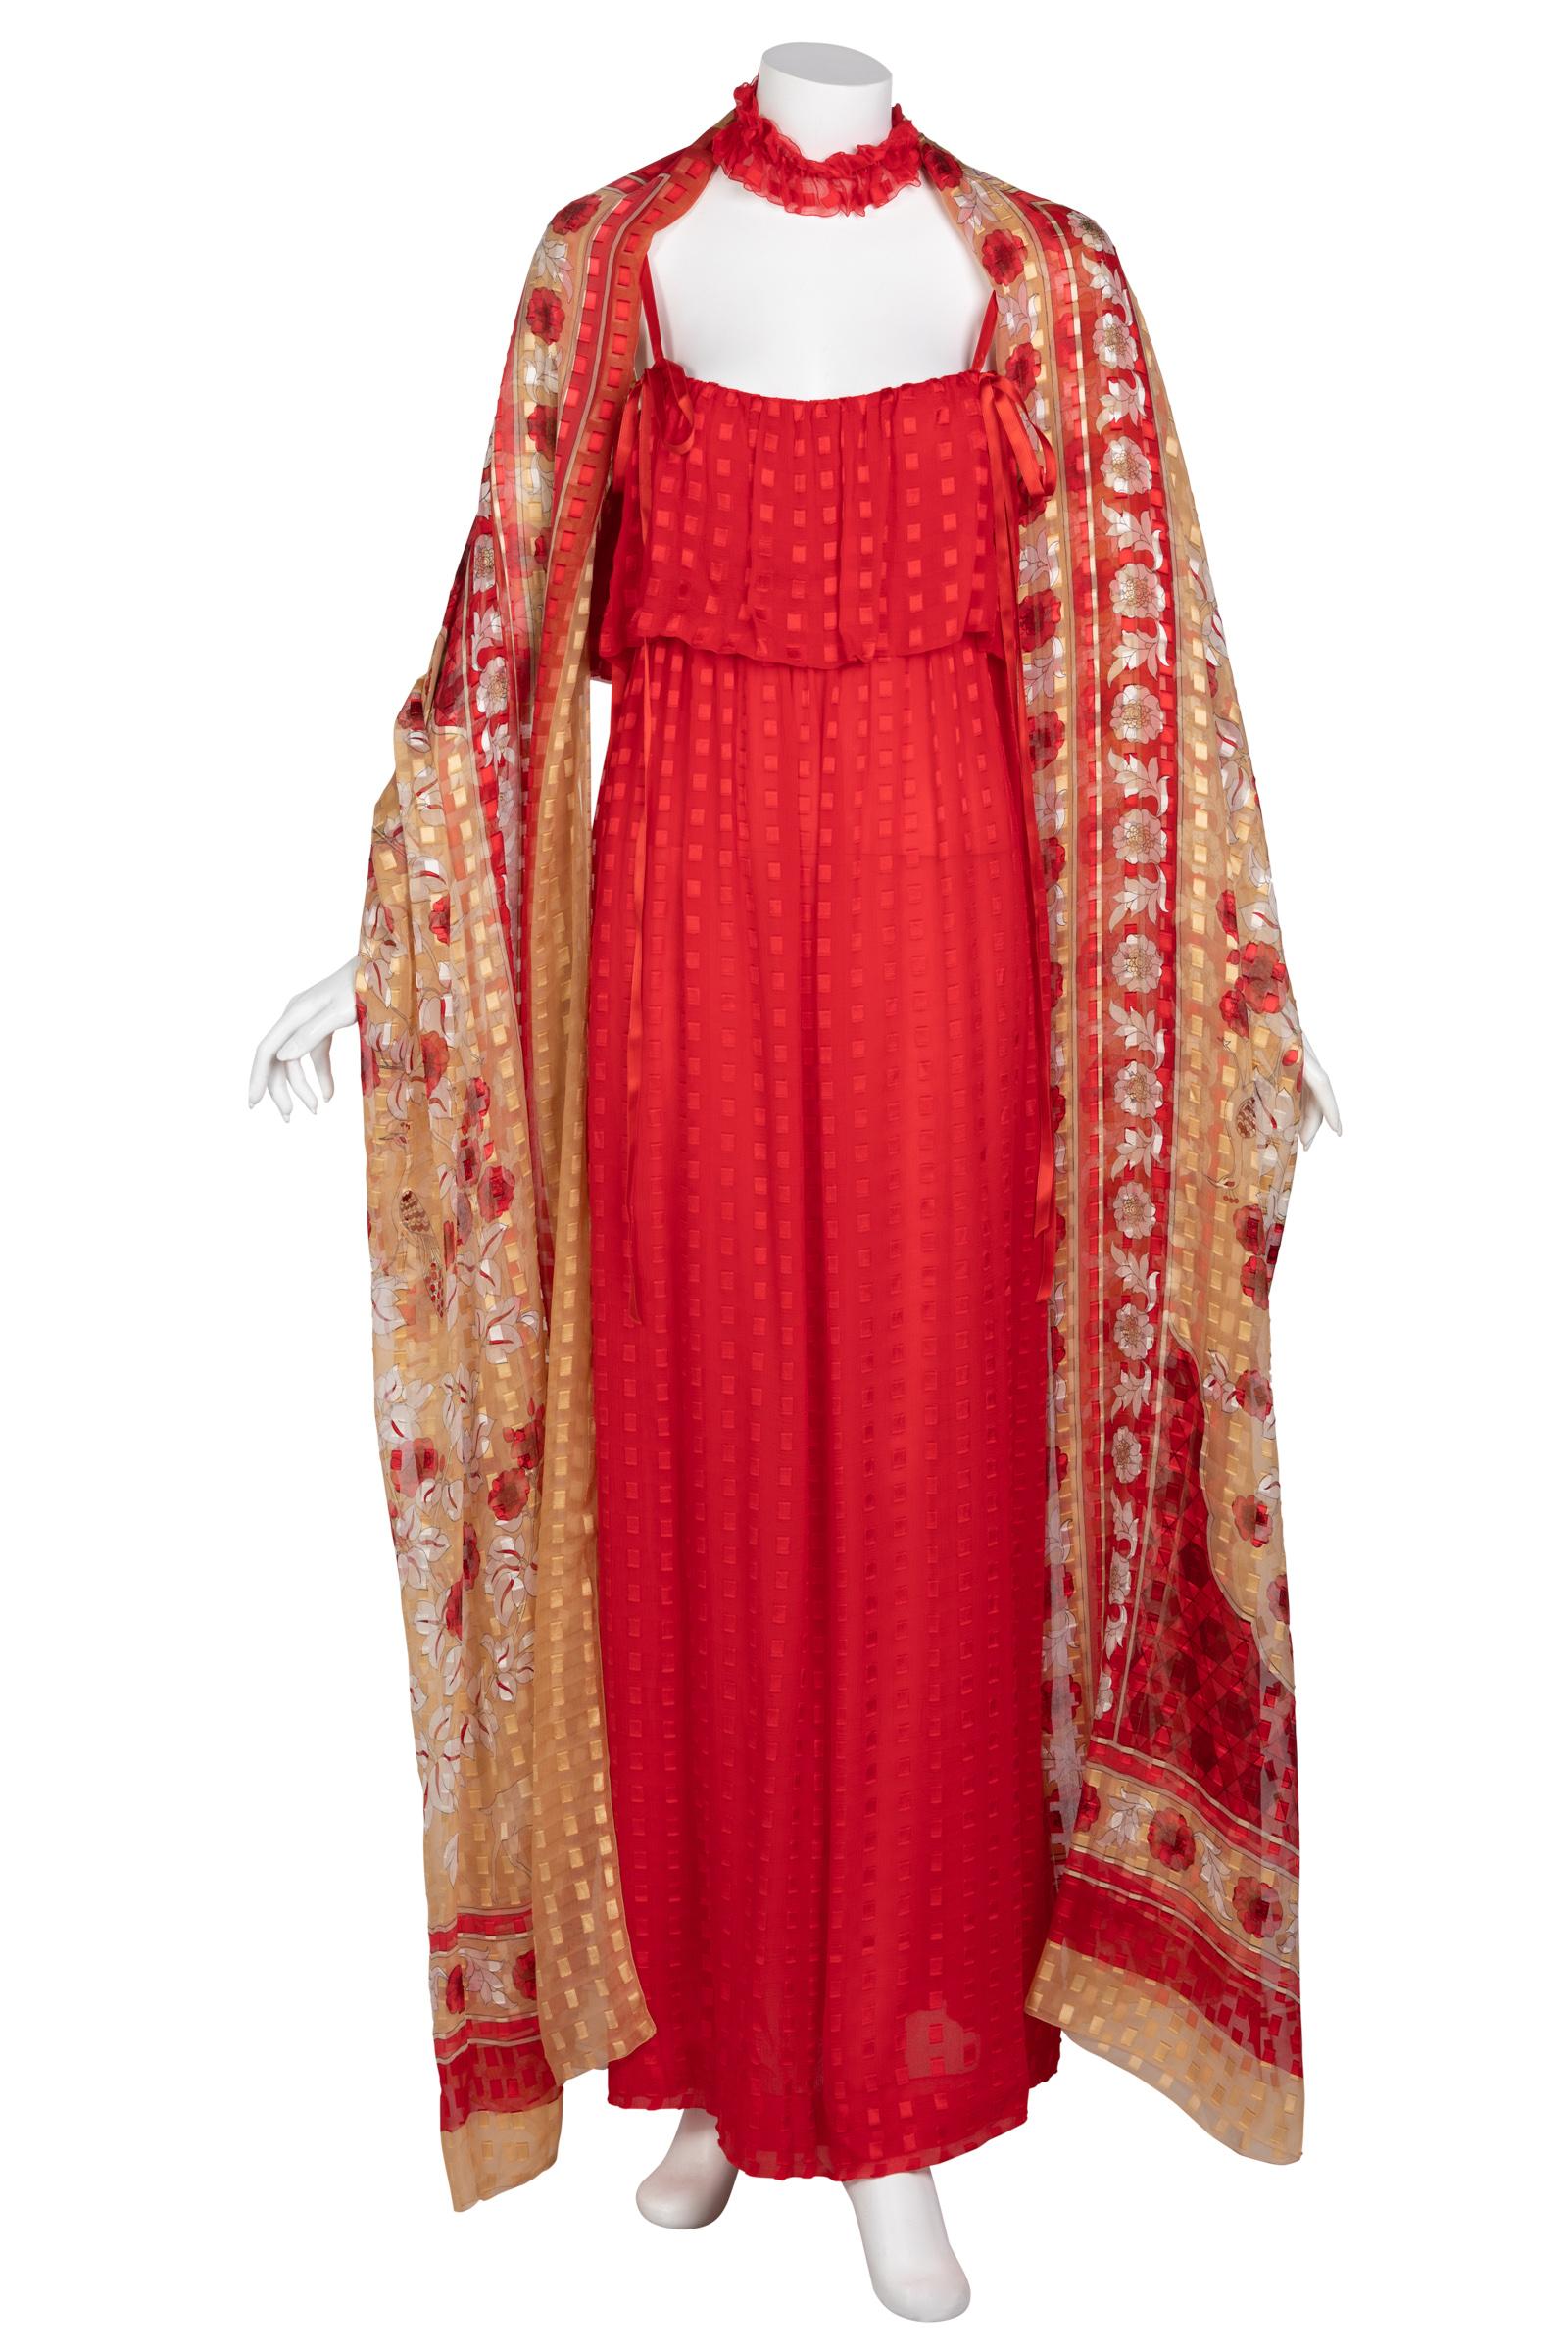 Christian Dior Red Maxi Dress & Shawl Documented 1970s 6